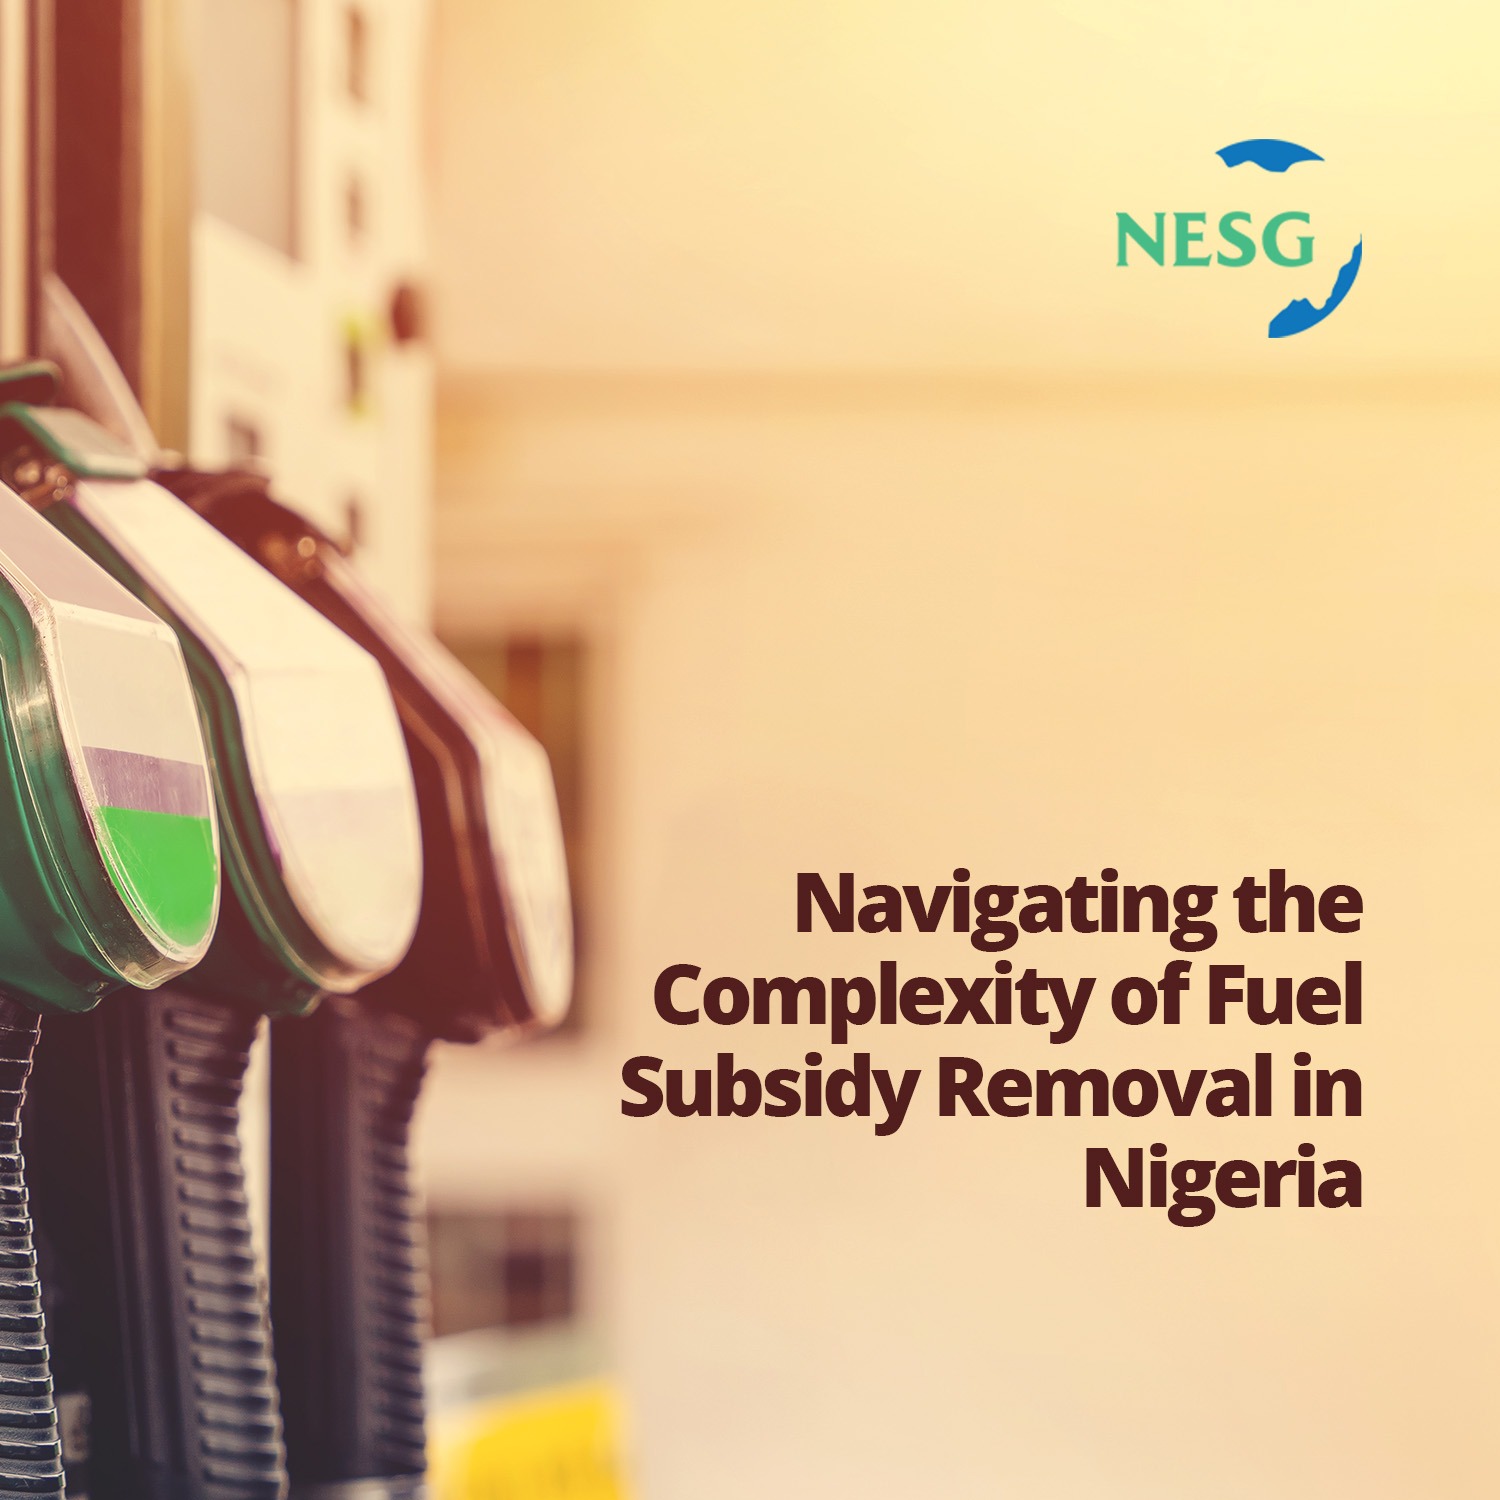 Navigating the Complexity of Fuel Subsidy Removal in Nigeria